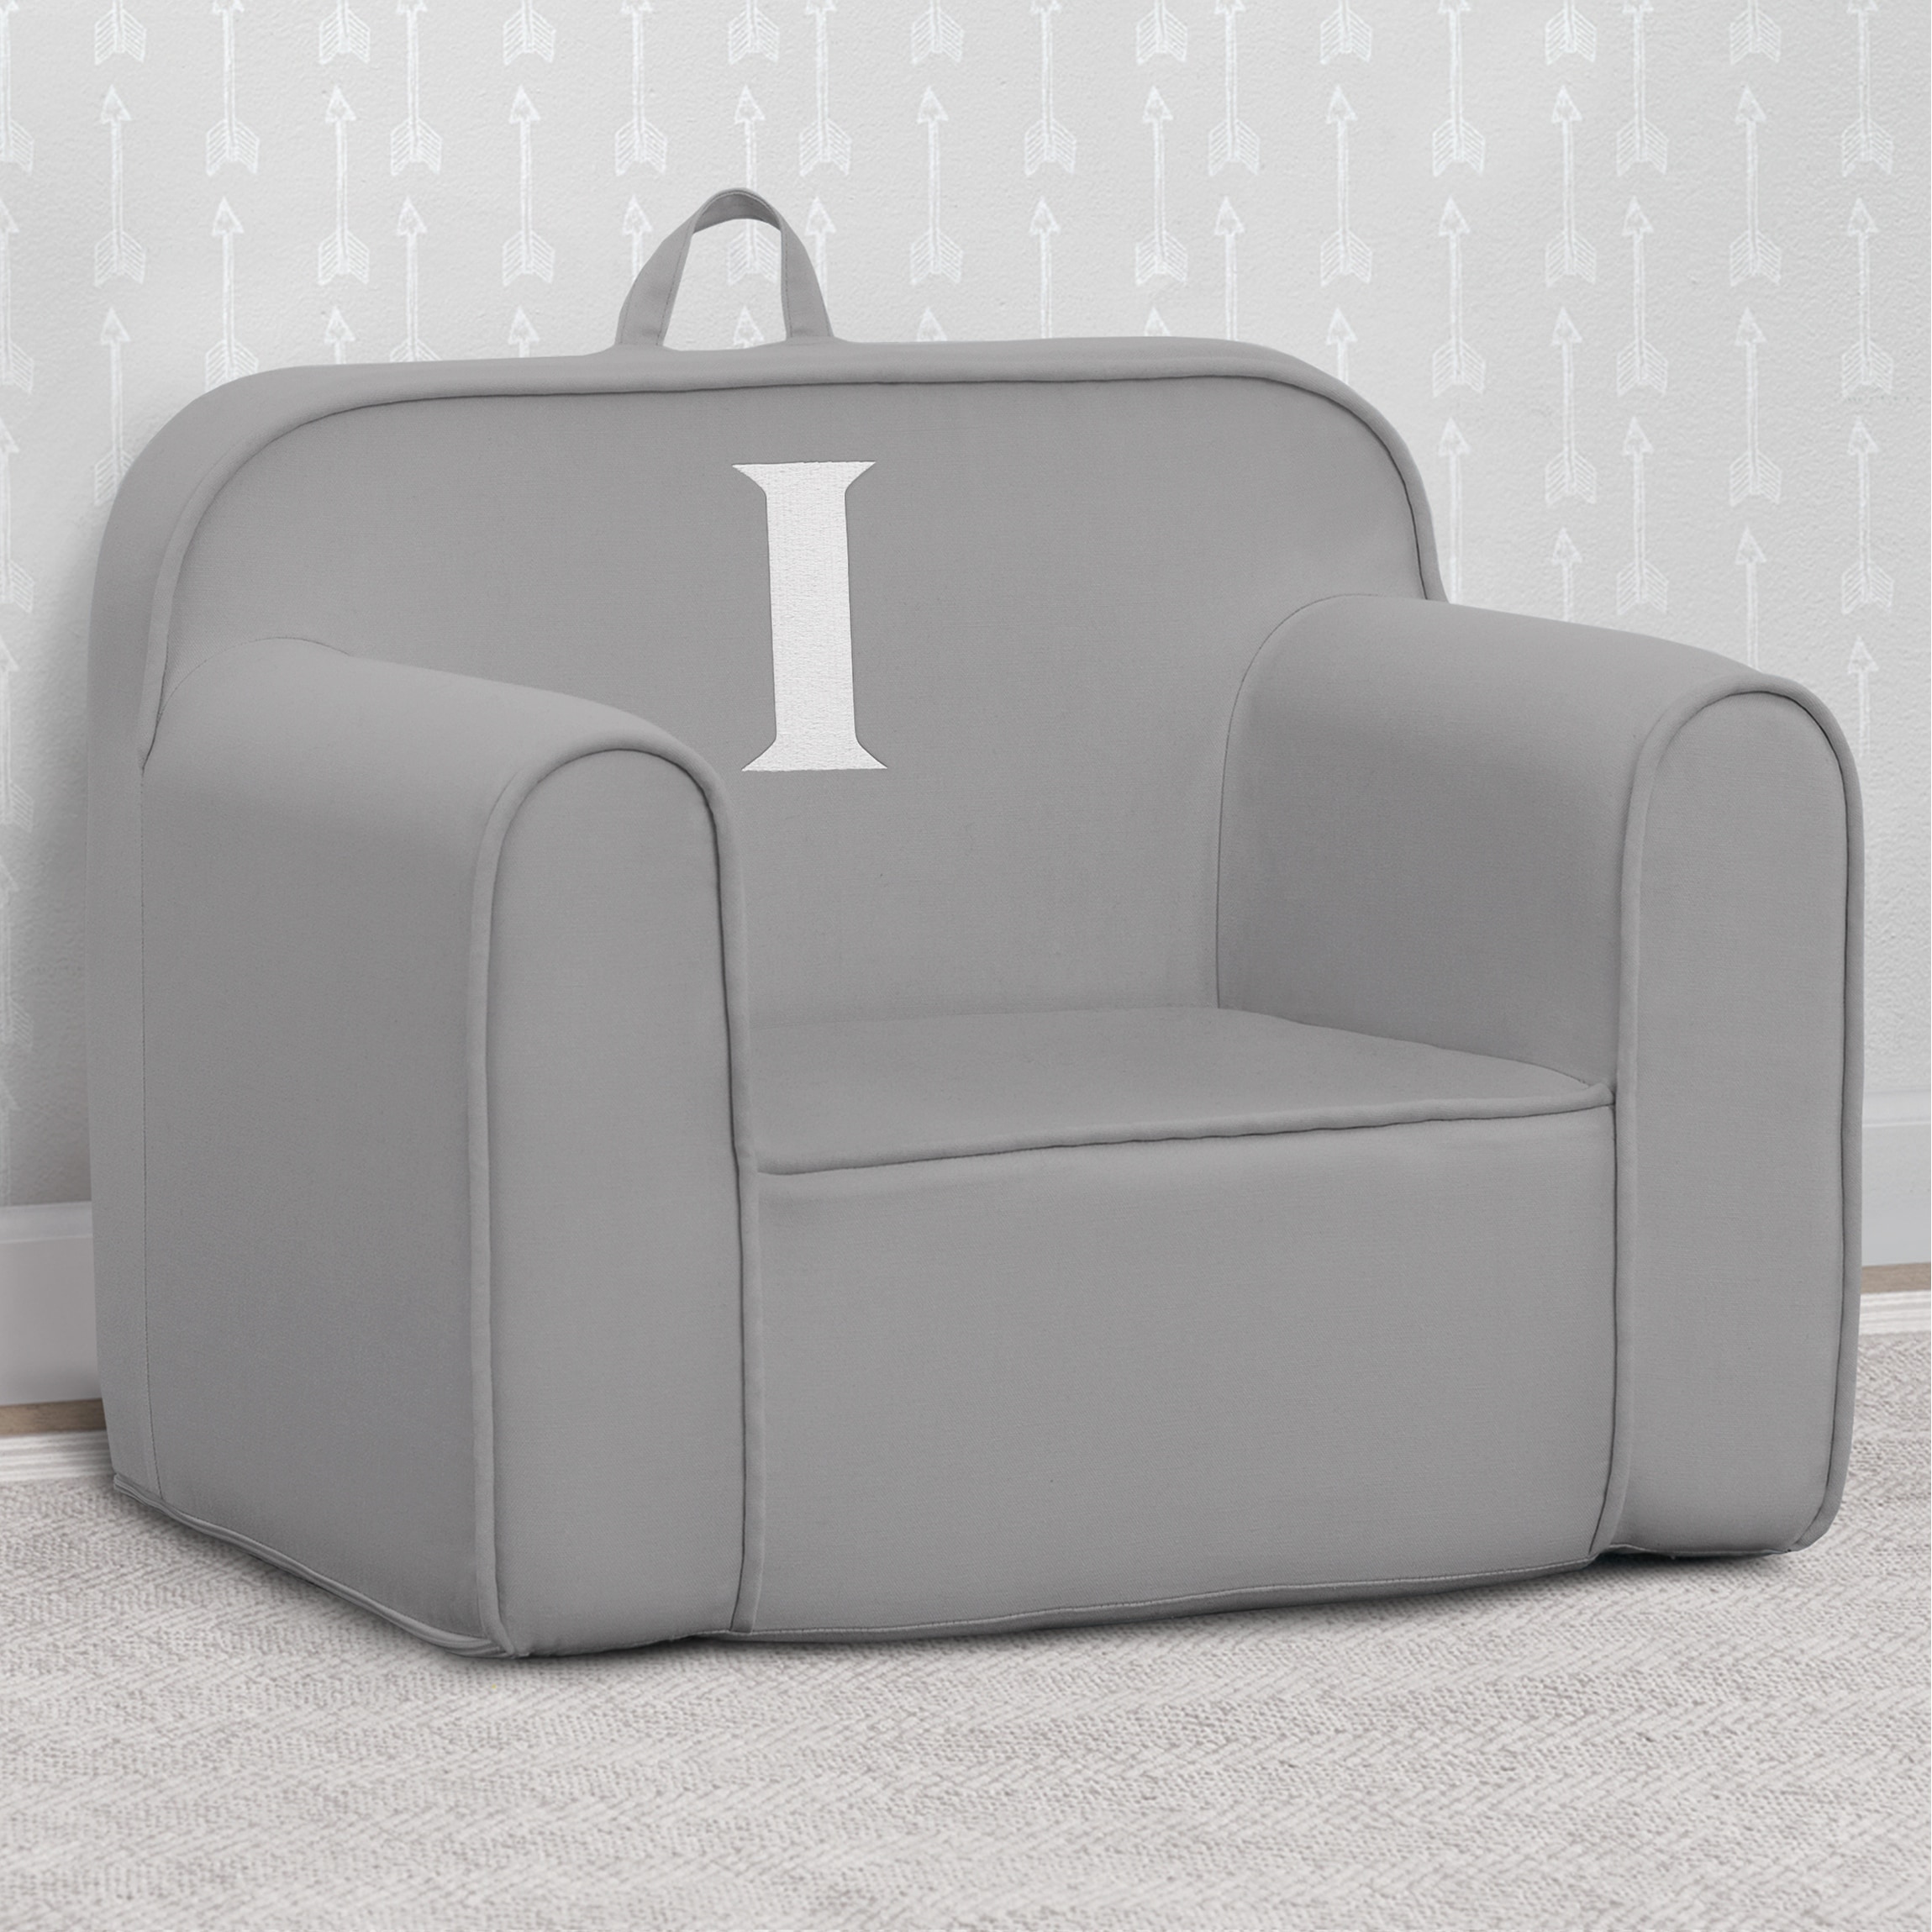 Delta Children Personalized Monogram Cozee Chair - Customize with Letter I  - Bed Bath & Beyond - 37243922